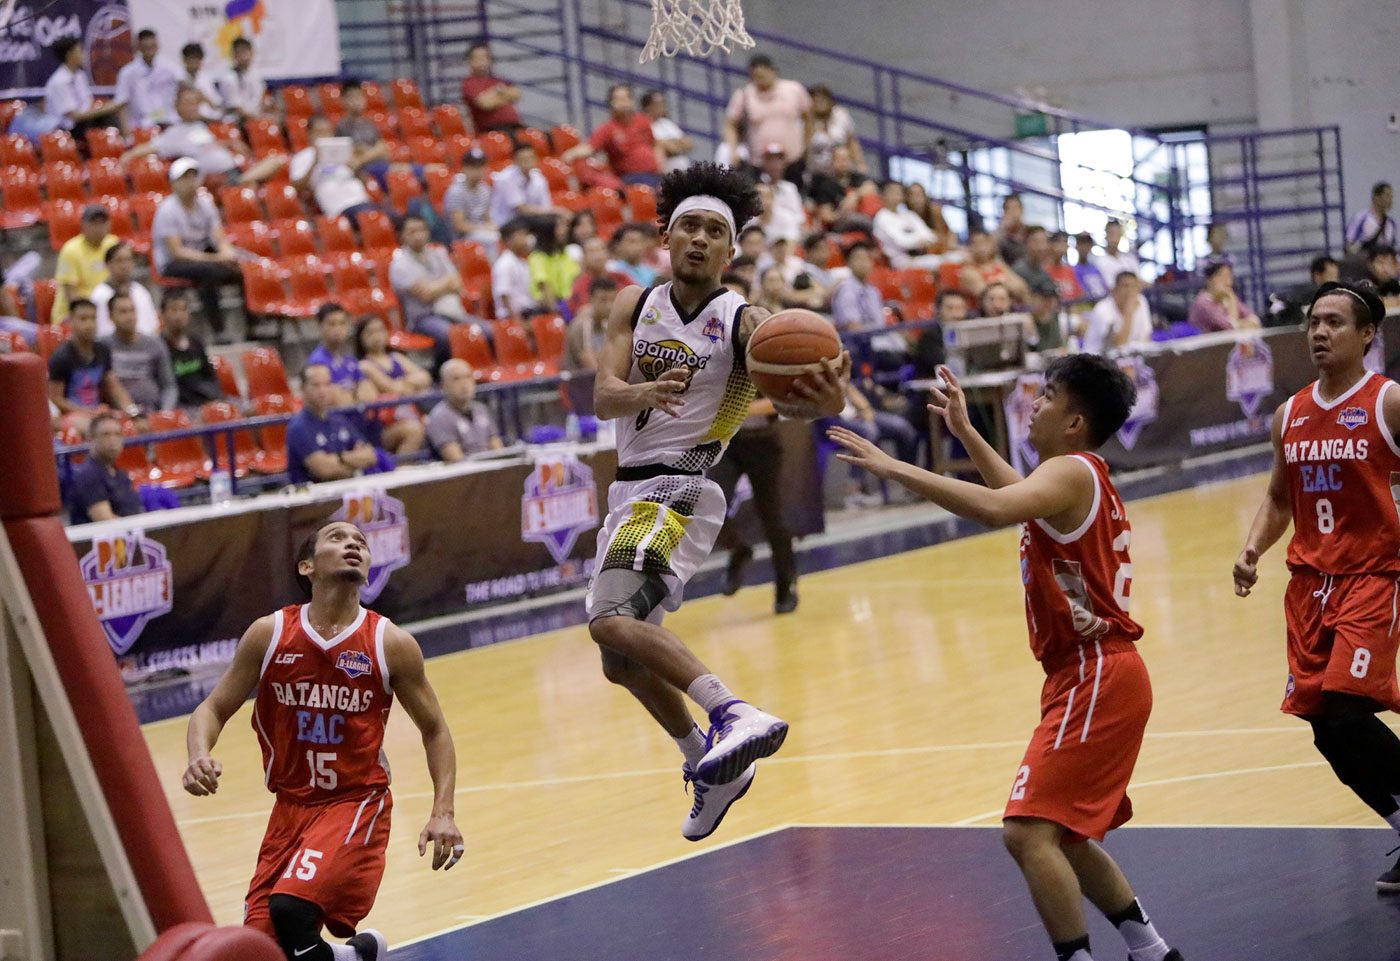 Trevis Jackson drops 30 in Gamboa Coffee’s rout of Batangas